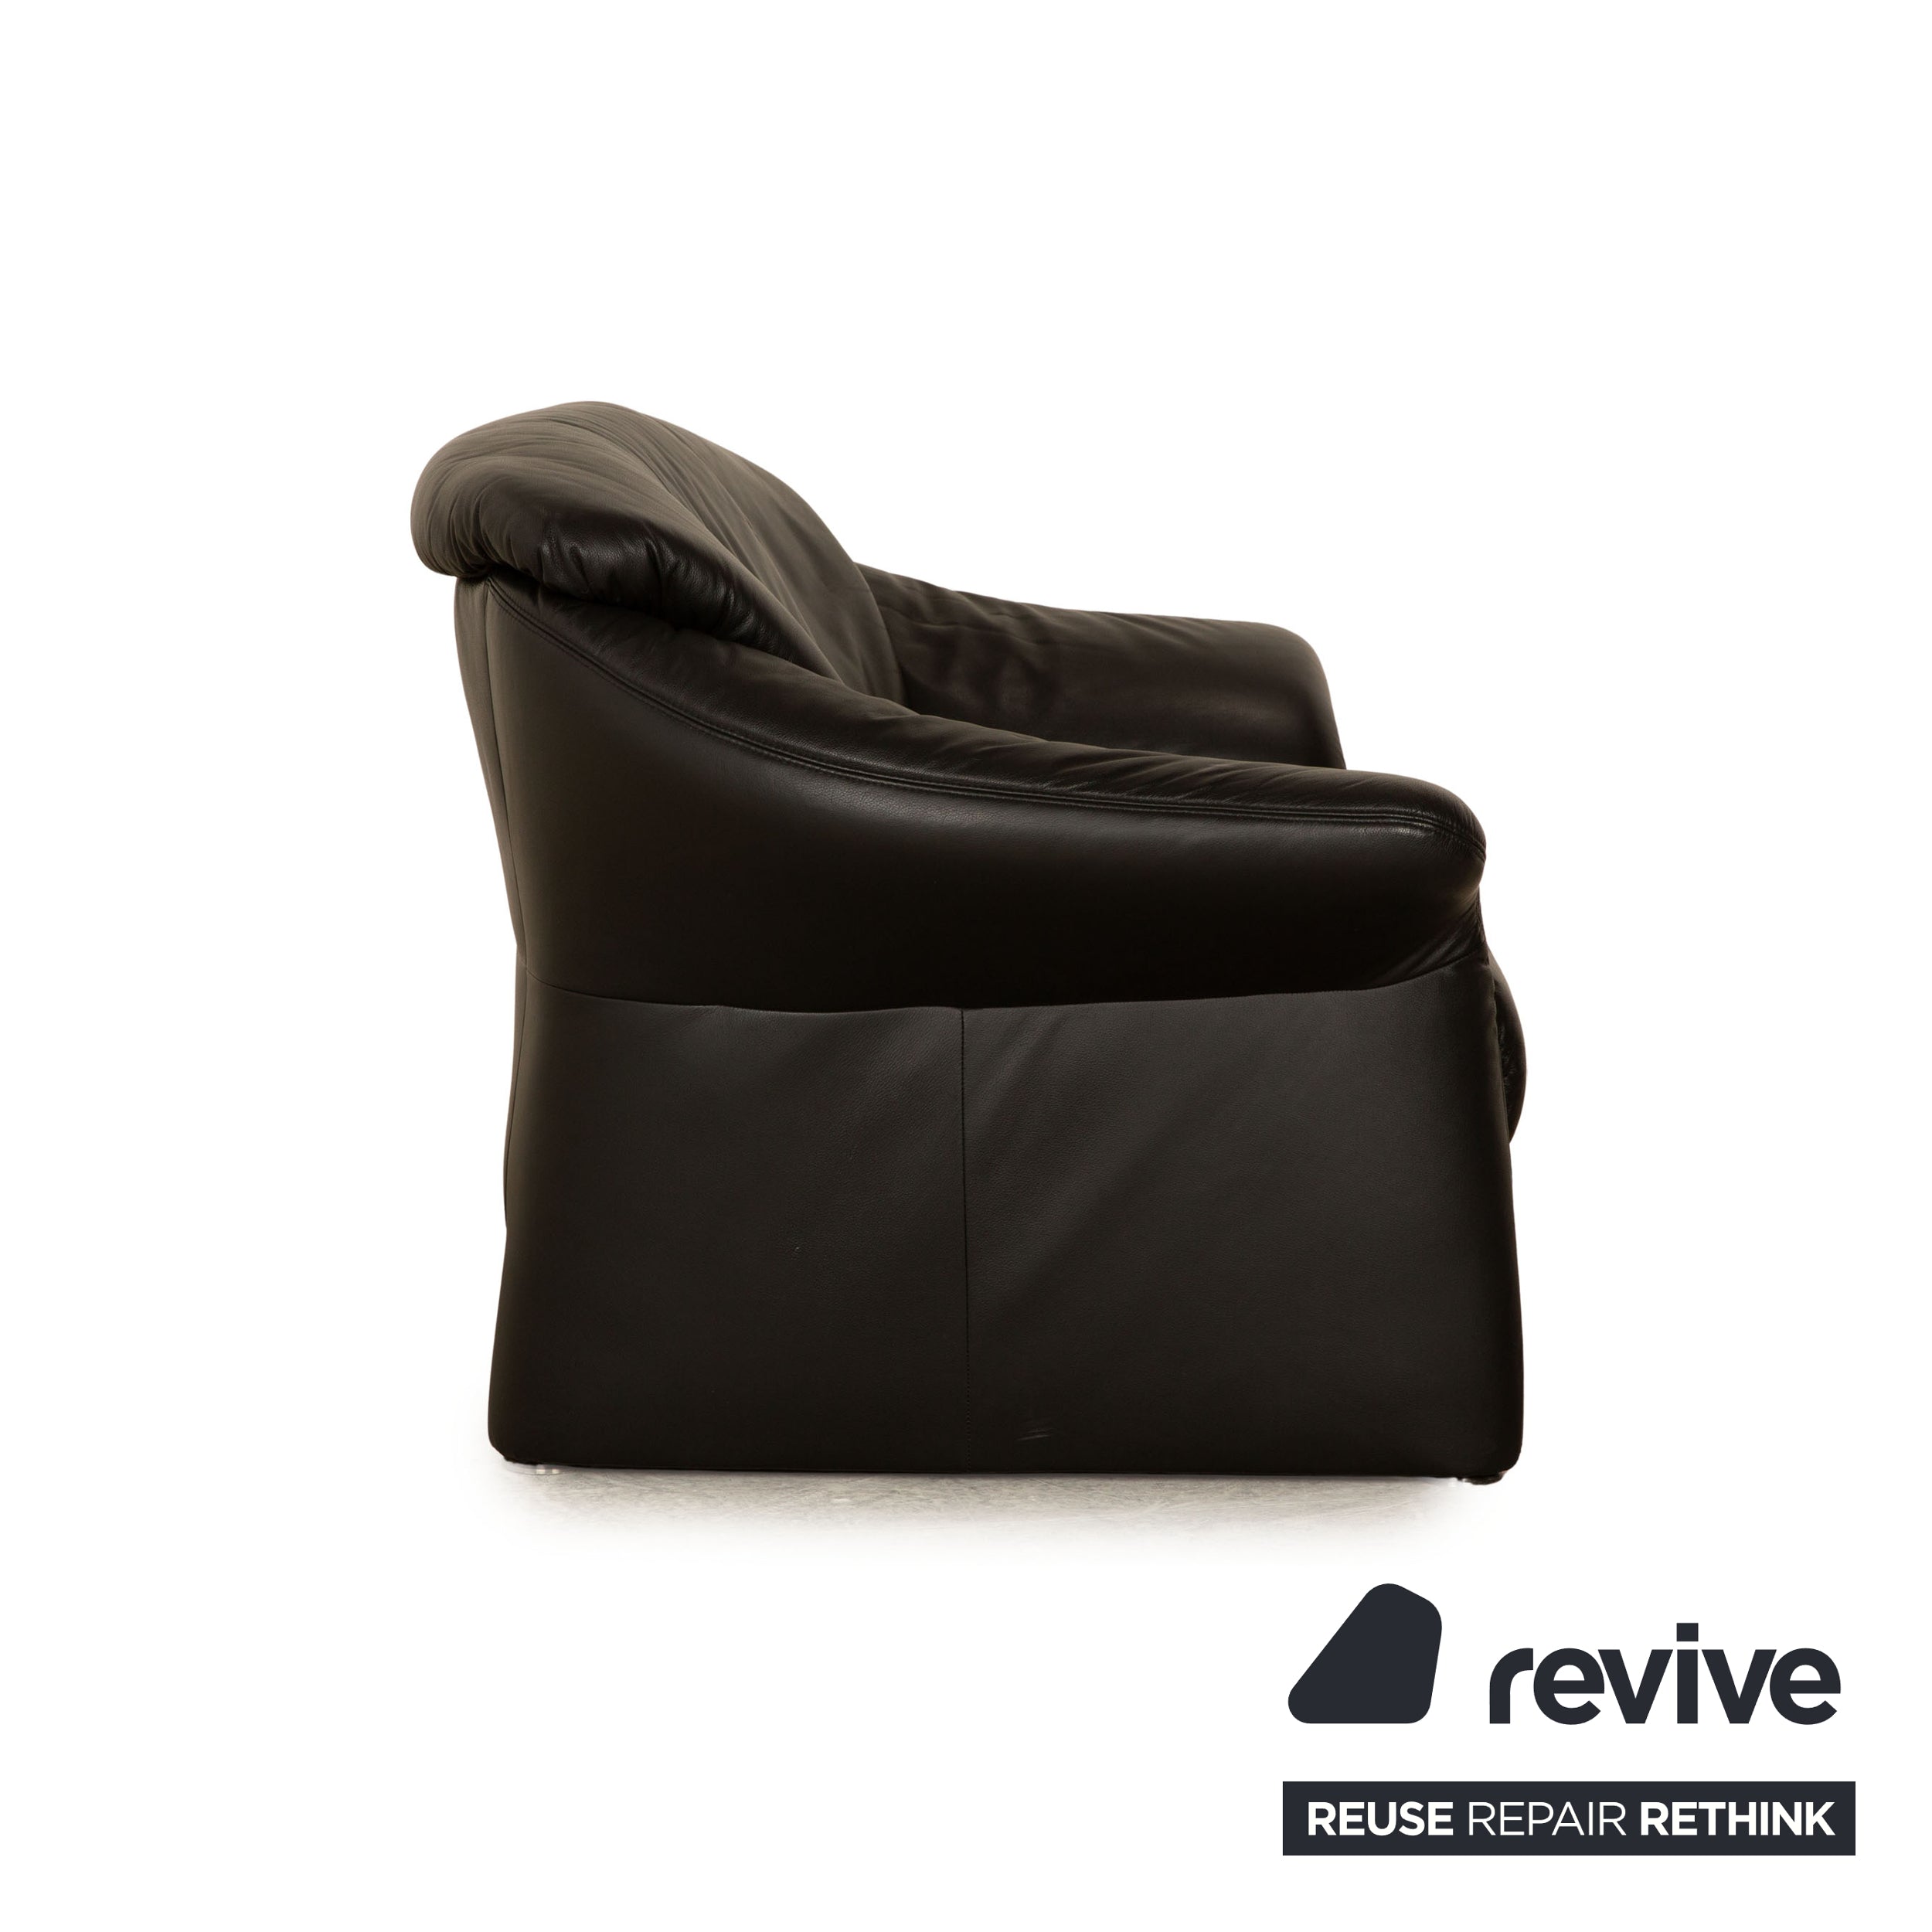 Sample ring leather two-seater black sofa couch